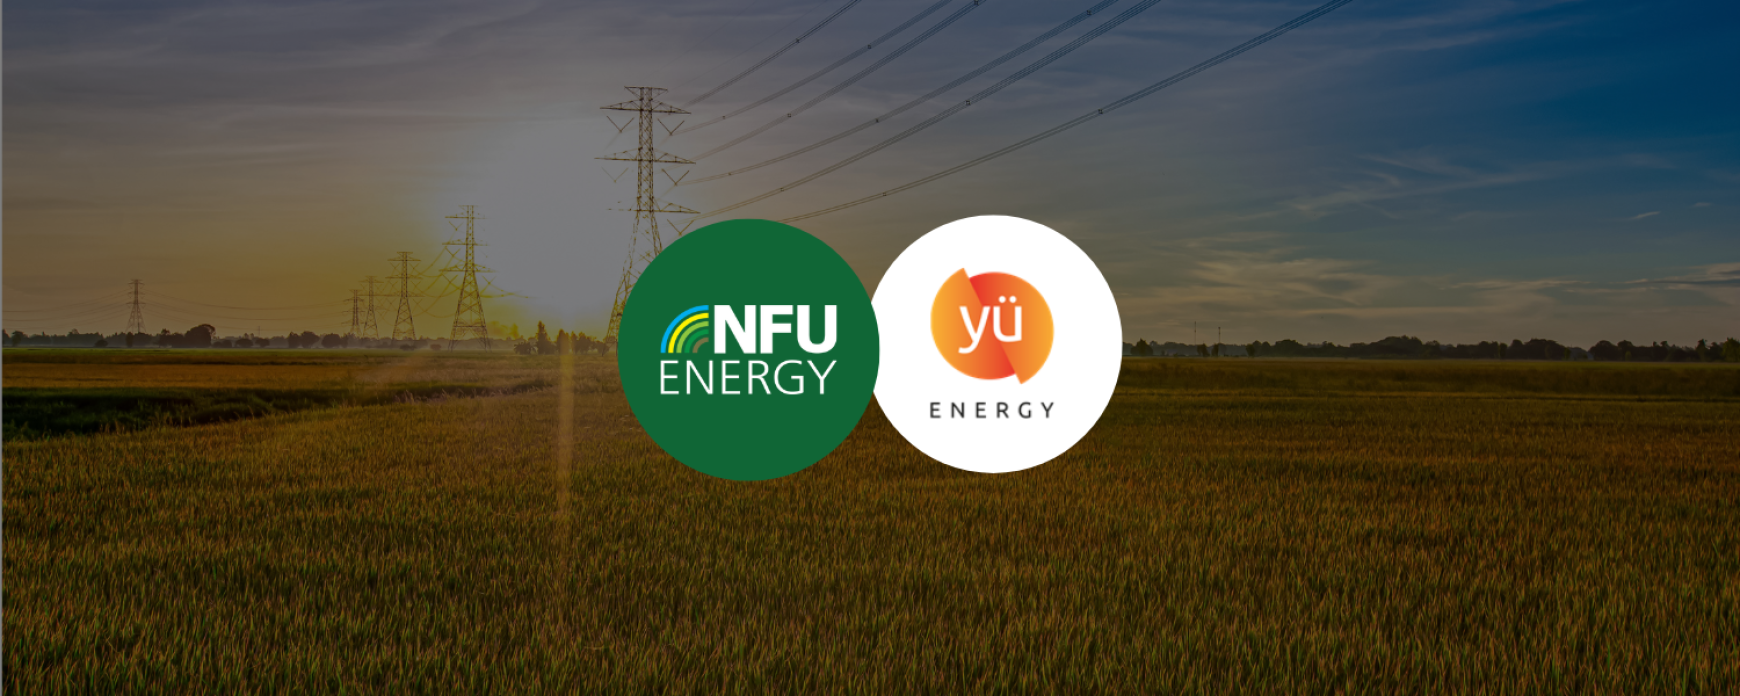 Save with NFU Energy’s April Buying Group with Yu Energy!